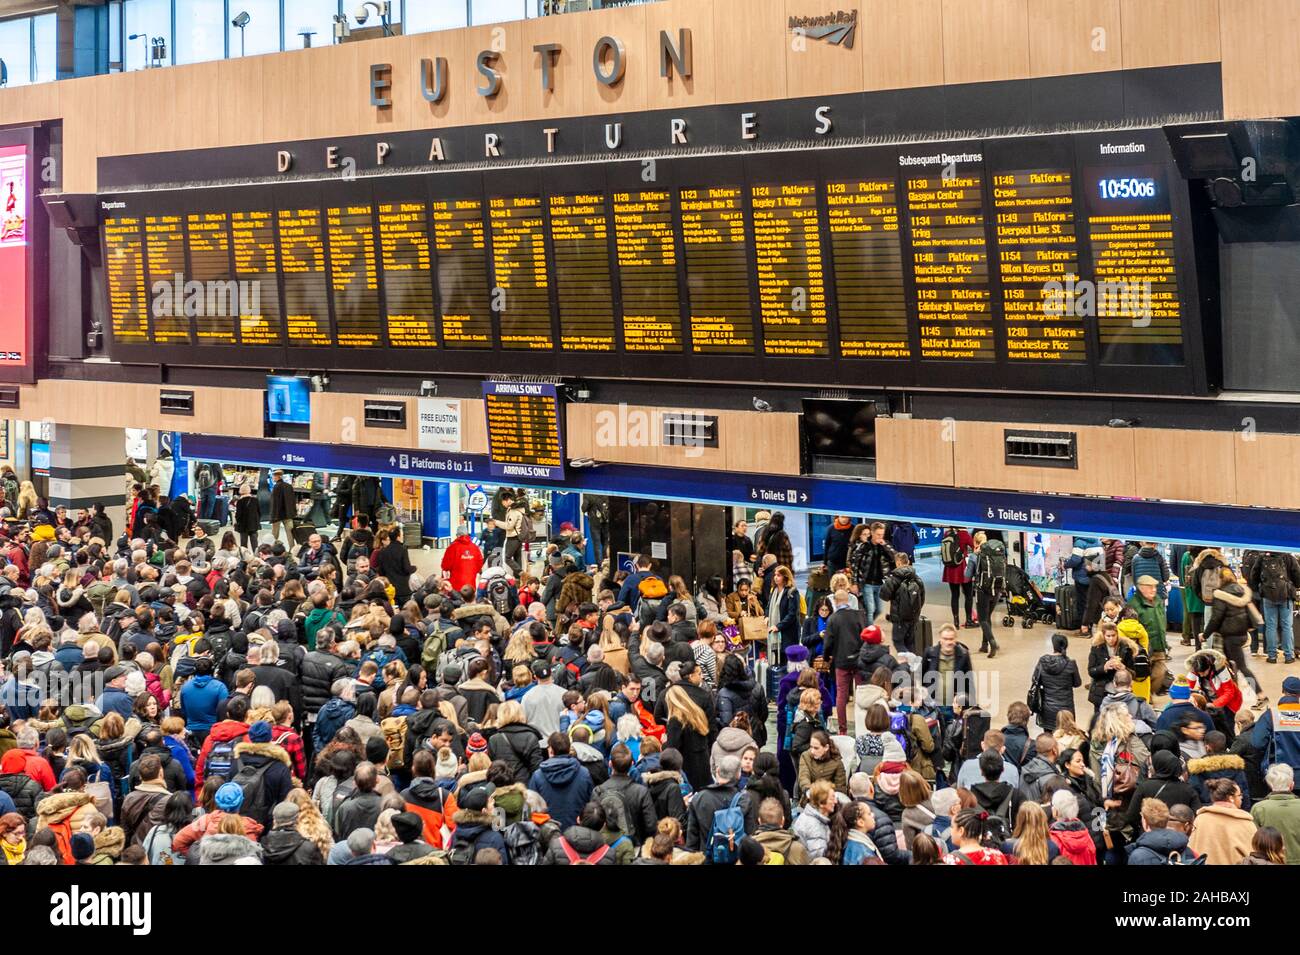 Huge crowds at London Euston railway station concourse looking at the departure boards. London, England. Stock Photo